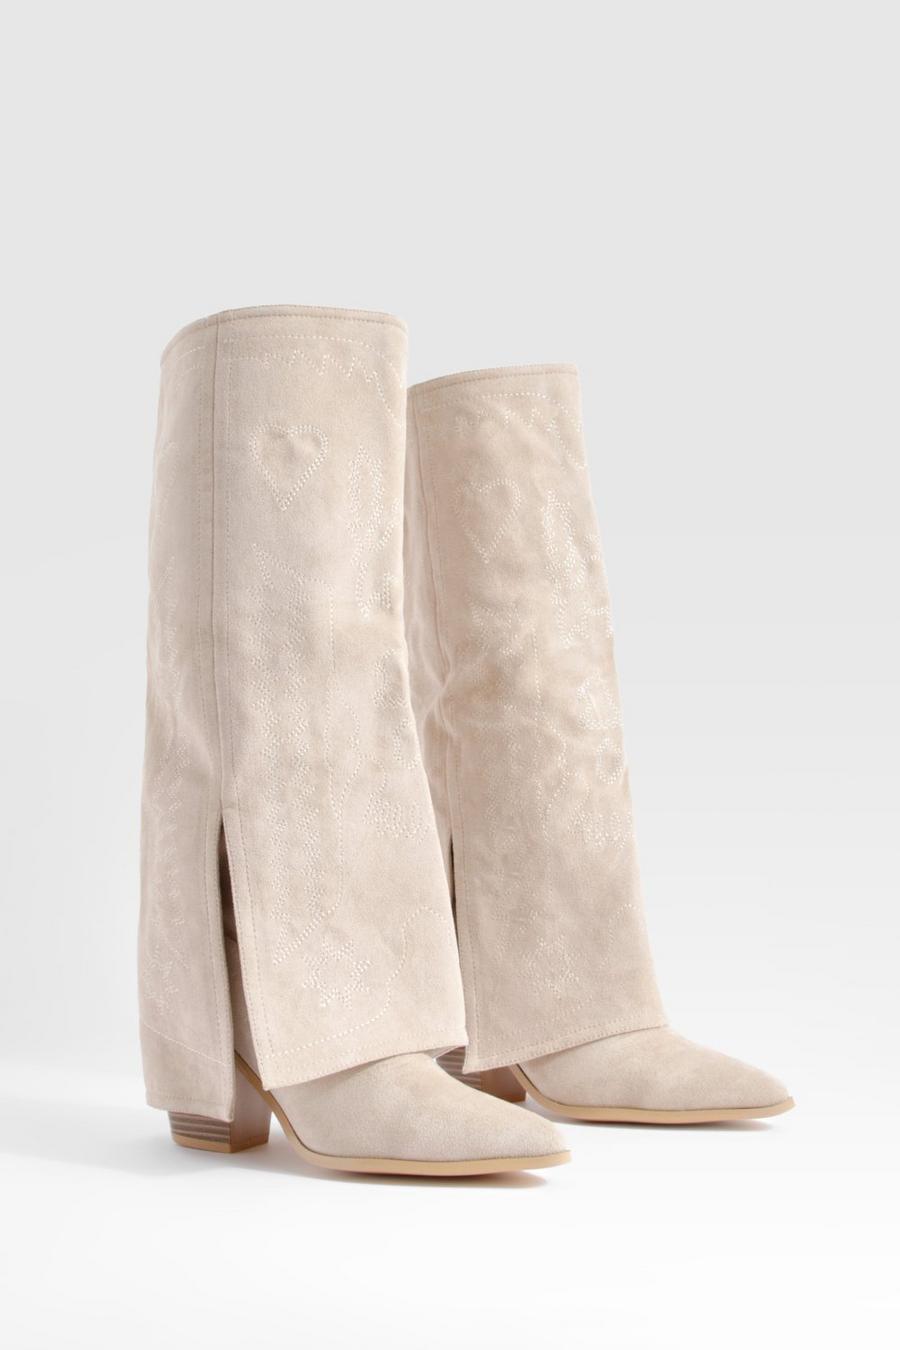 Sand Wide Width Foldover Western Knee High Boots